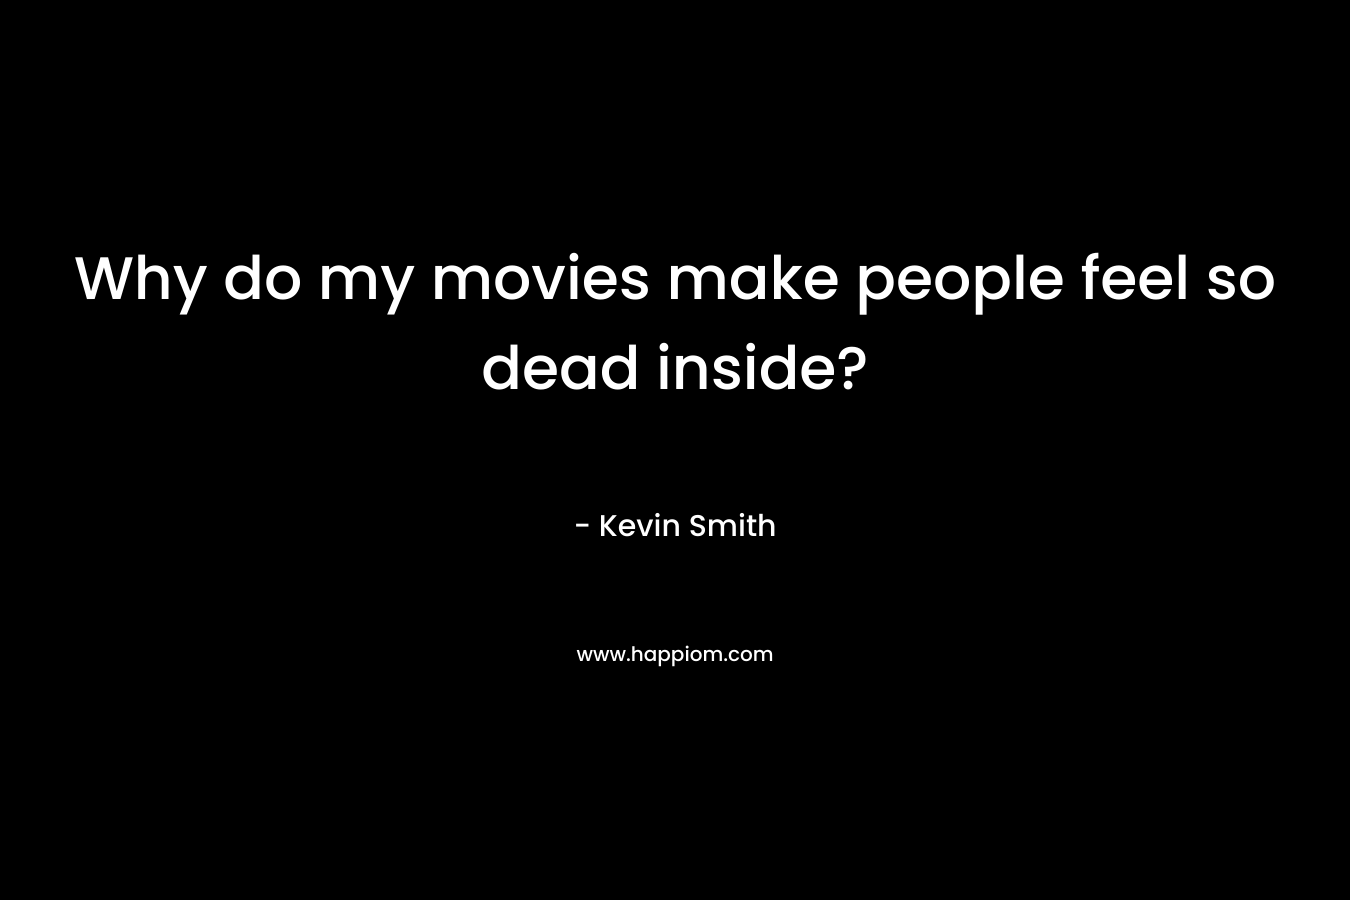 Why do my movies make people feel so dead inside? – Kevin Smith